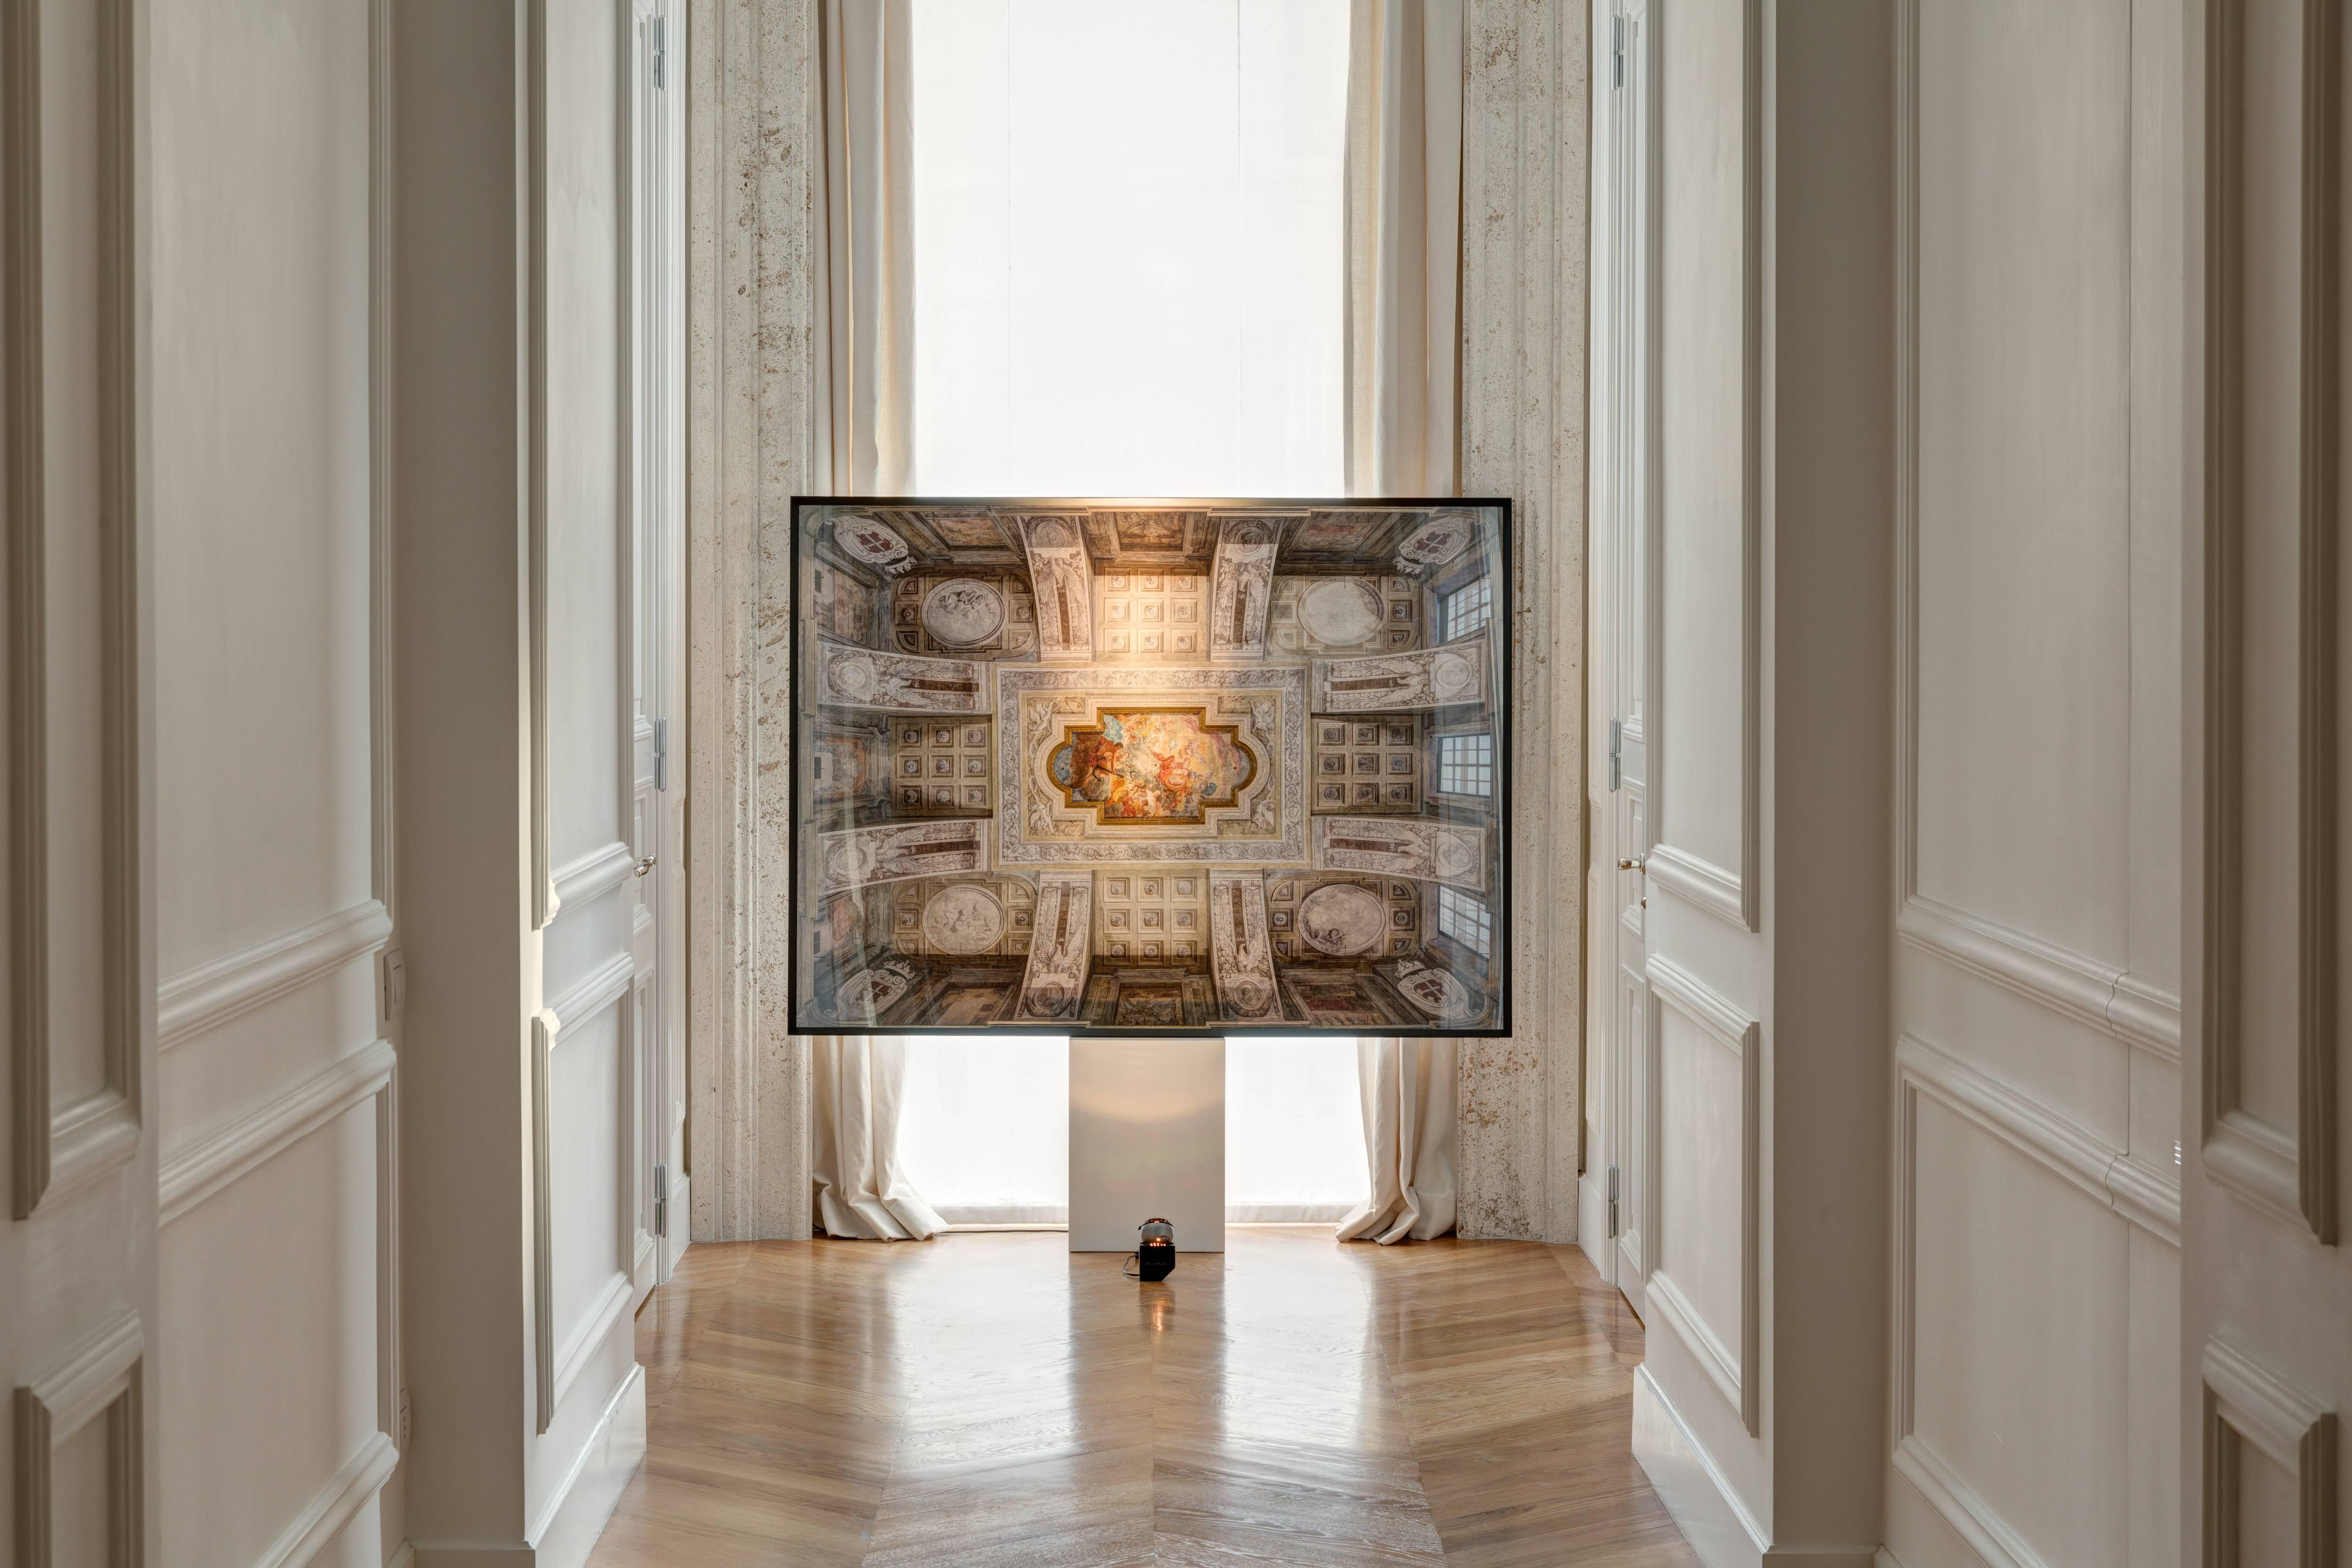 Carlo Carossio
Palazzo Madama, soffitto ,Torino, 2017

From series Grande Bellezza for Compendio Gallery, Roma
Fuji ultra HD
Edition of 10 +2 ap
Measures: 160 x 120 cm
signed and numbered on verso by the artist
Measures available also:
100